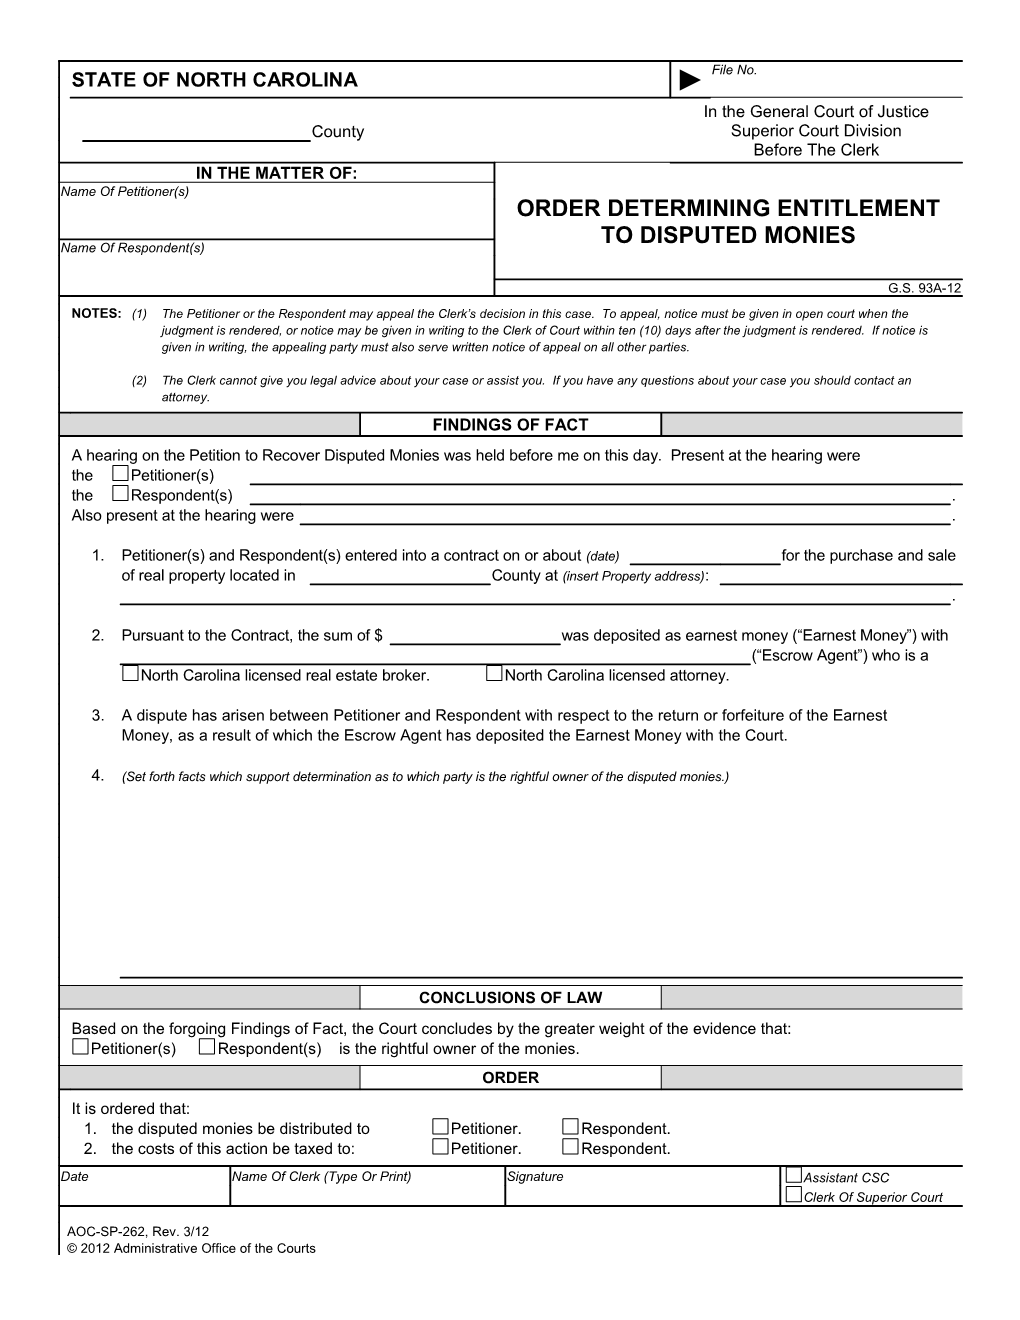 Order Determining Entitlement to Disputed Funds